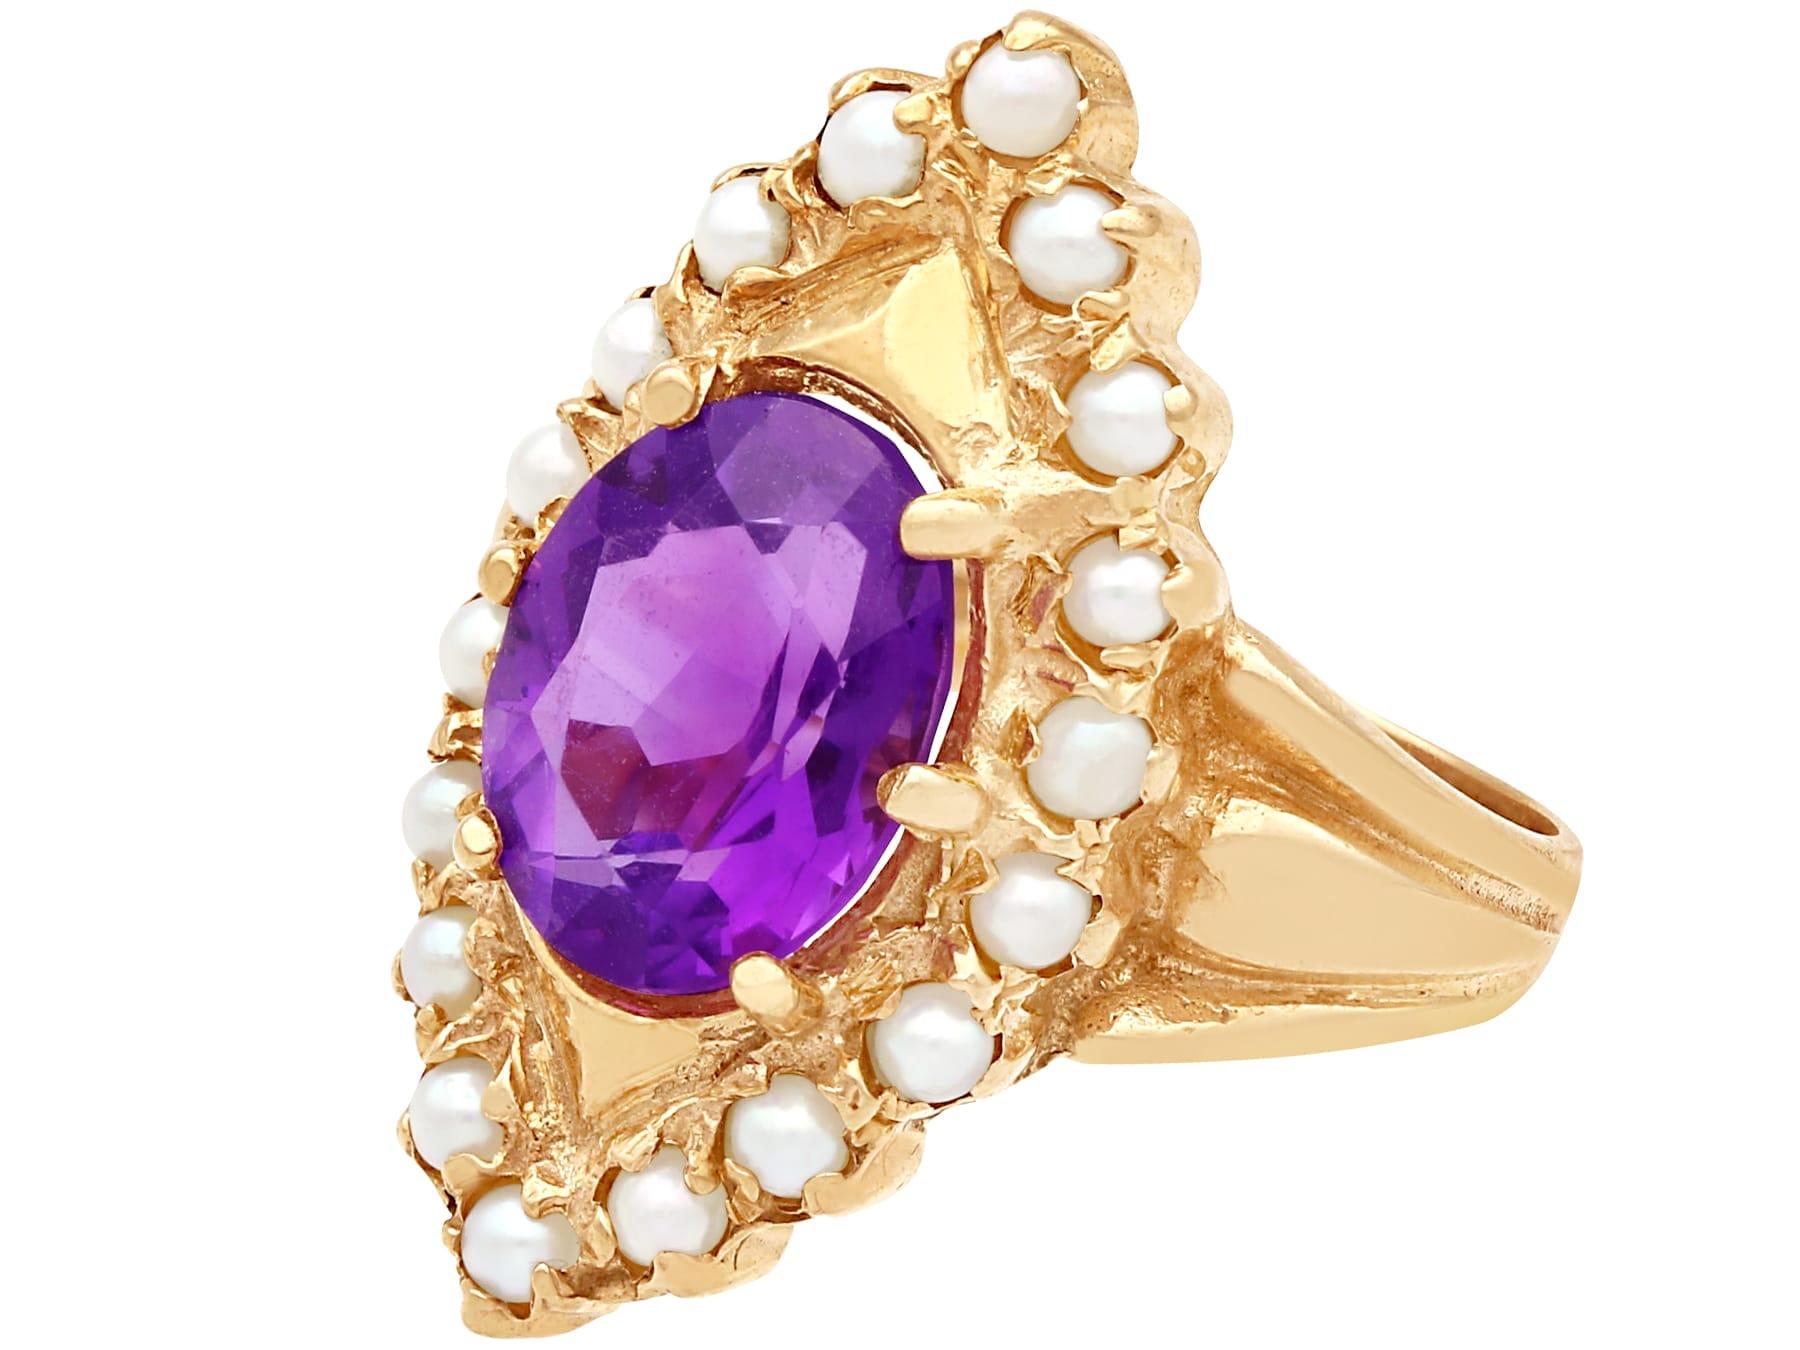 1970s, 2.51 Carat Amethyst and Seed Pearl Yellow Gold Cocktail Ring In Excellent Condition For Sale In Jesmond, Newcastle Upon Tyne